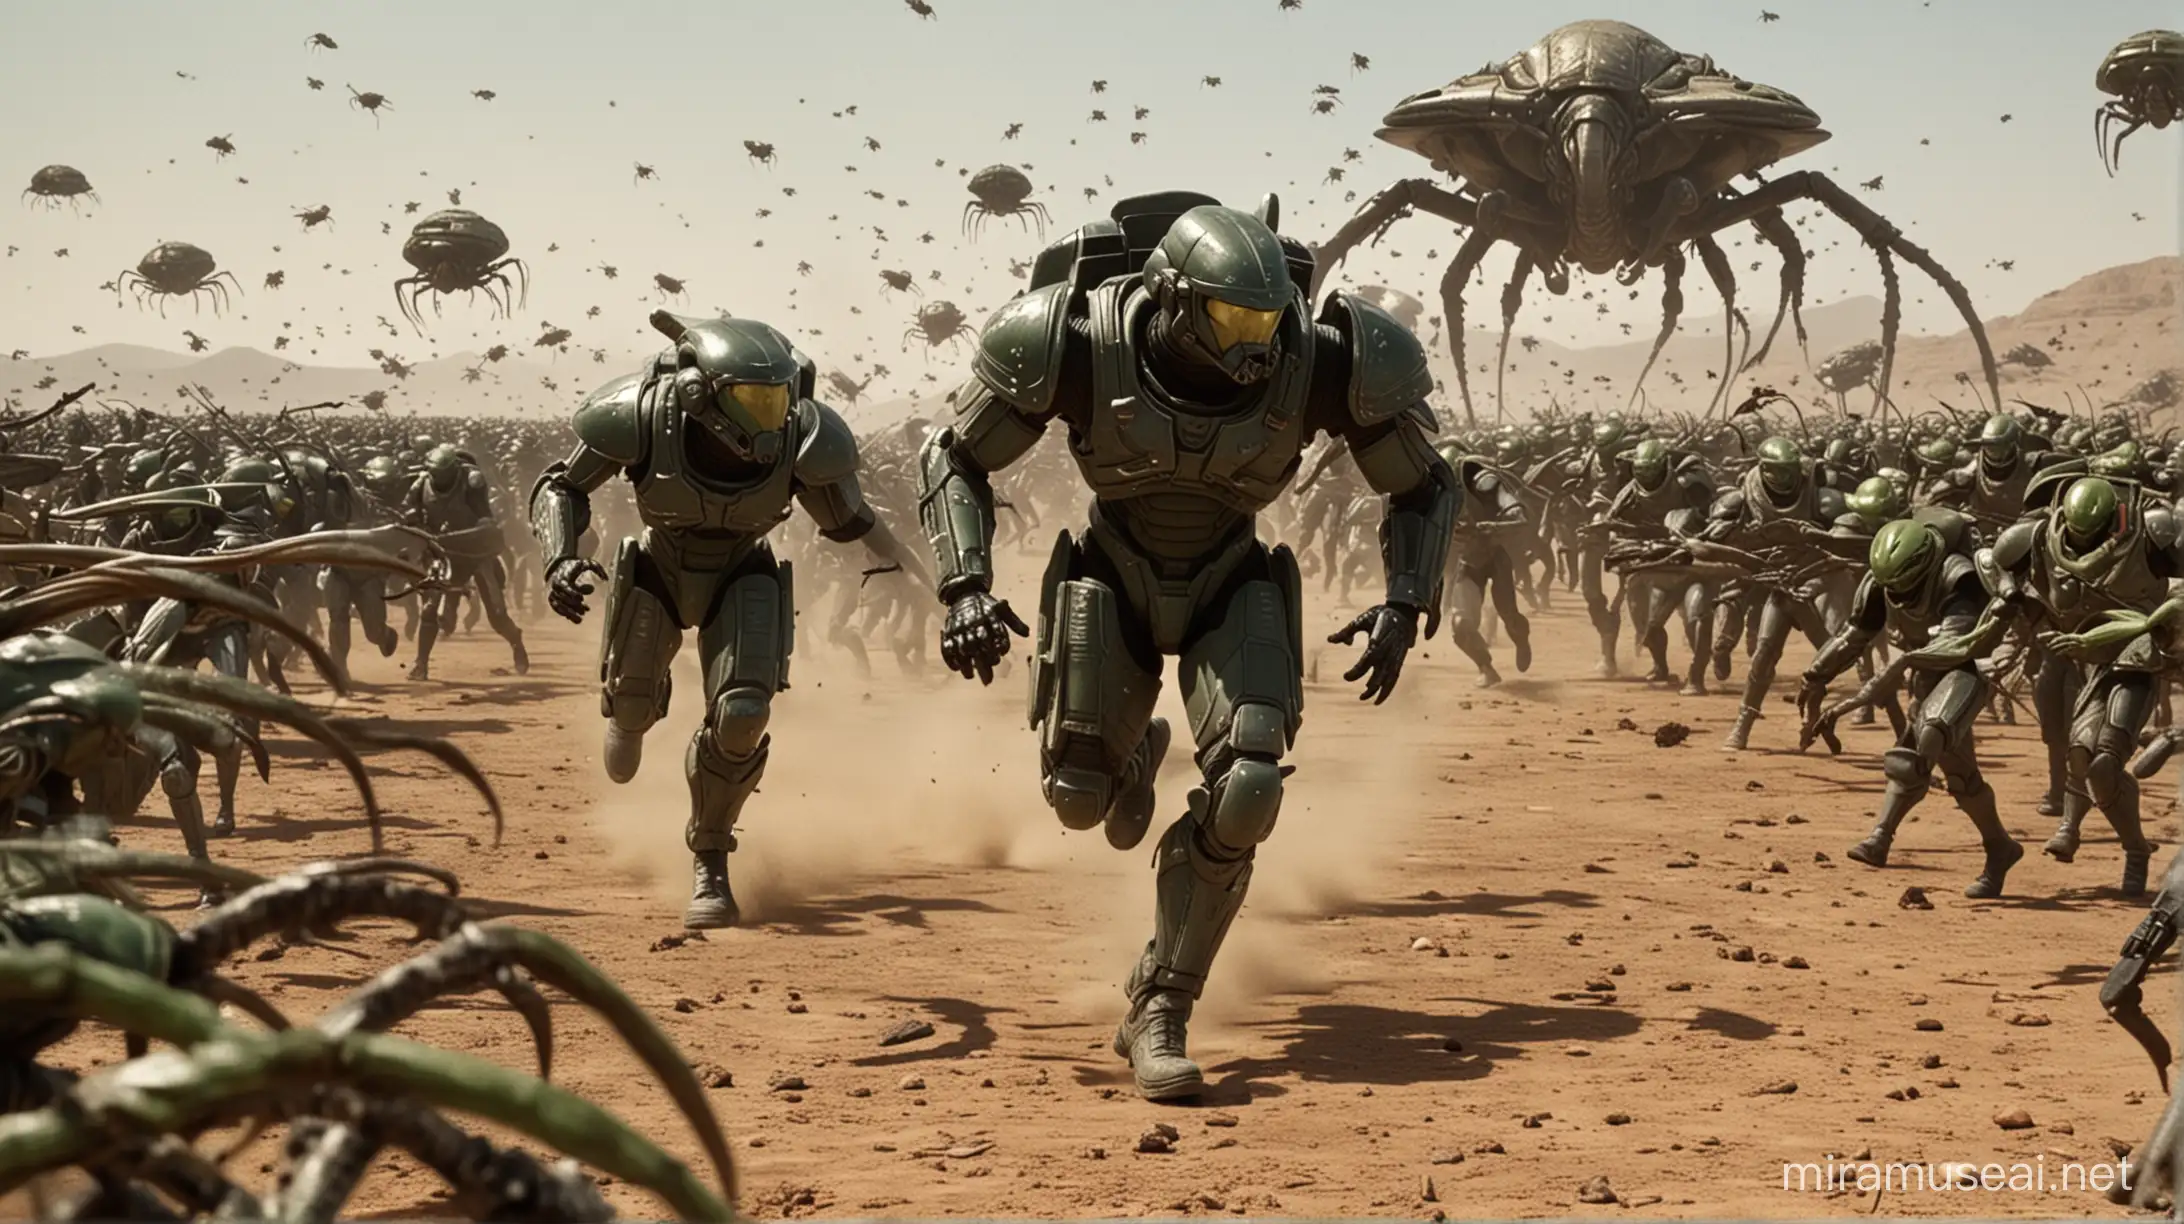 Starship Troopers, Soldier running from green alien bugs